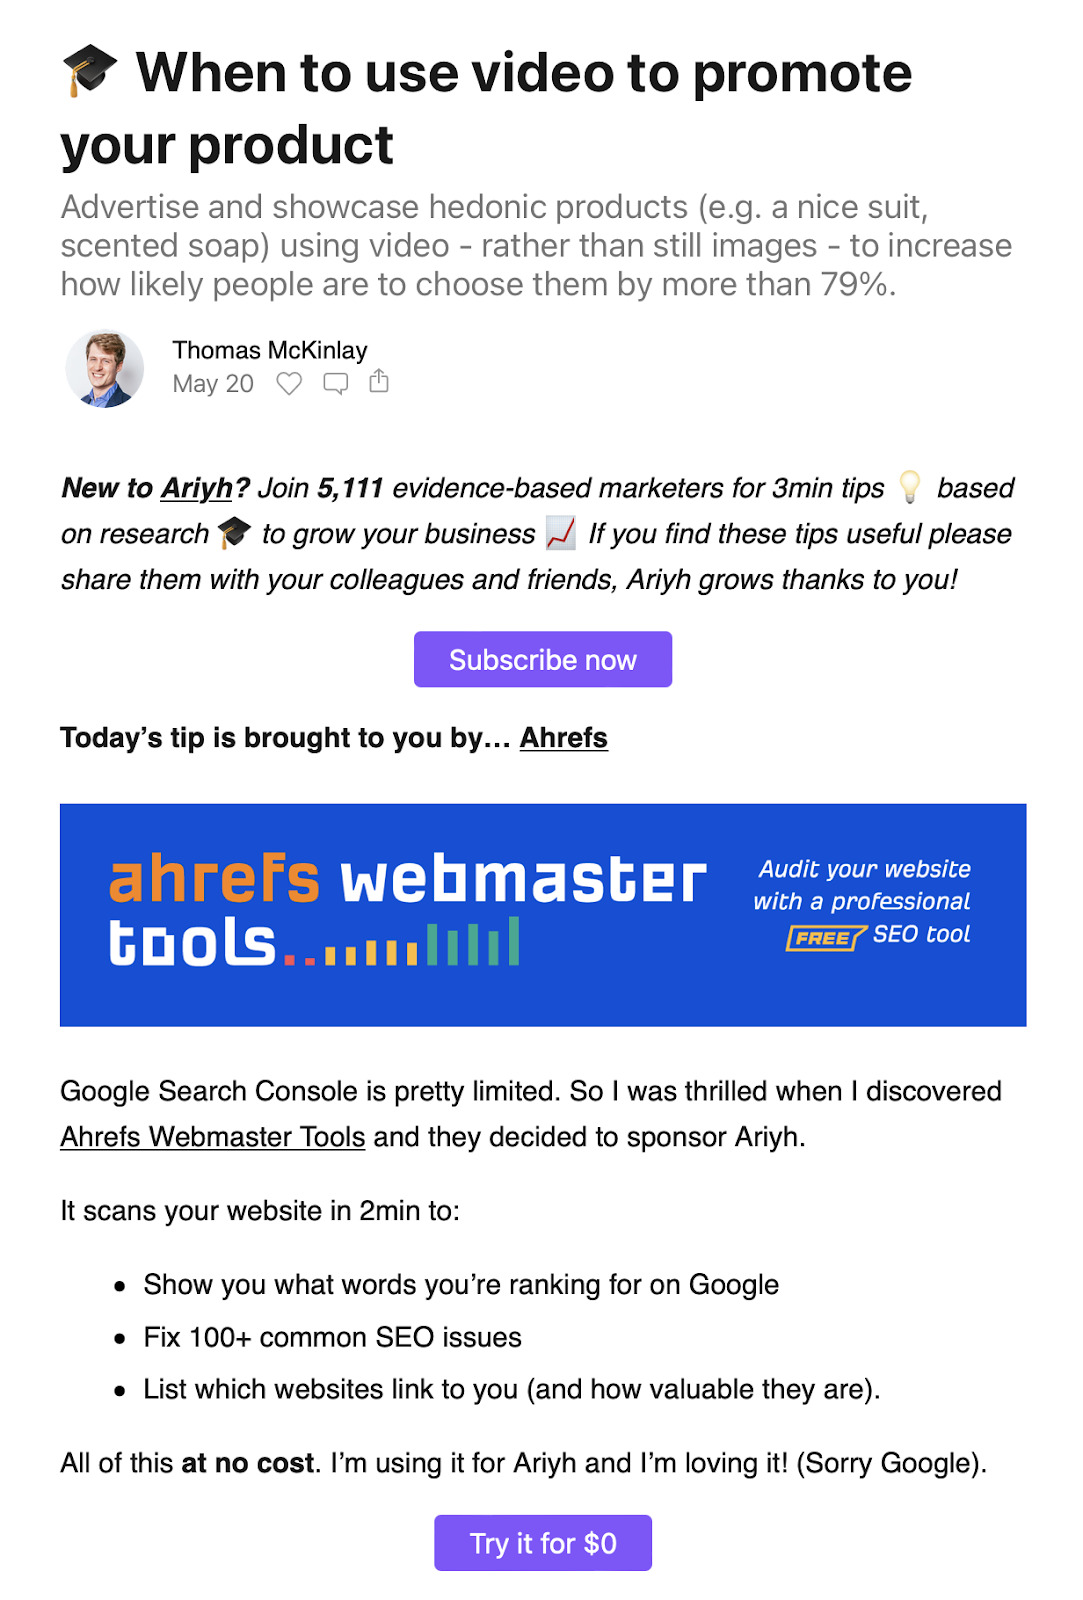 Ahrefs-sponsored content in an influencer's email